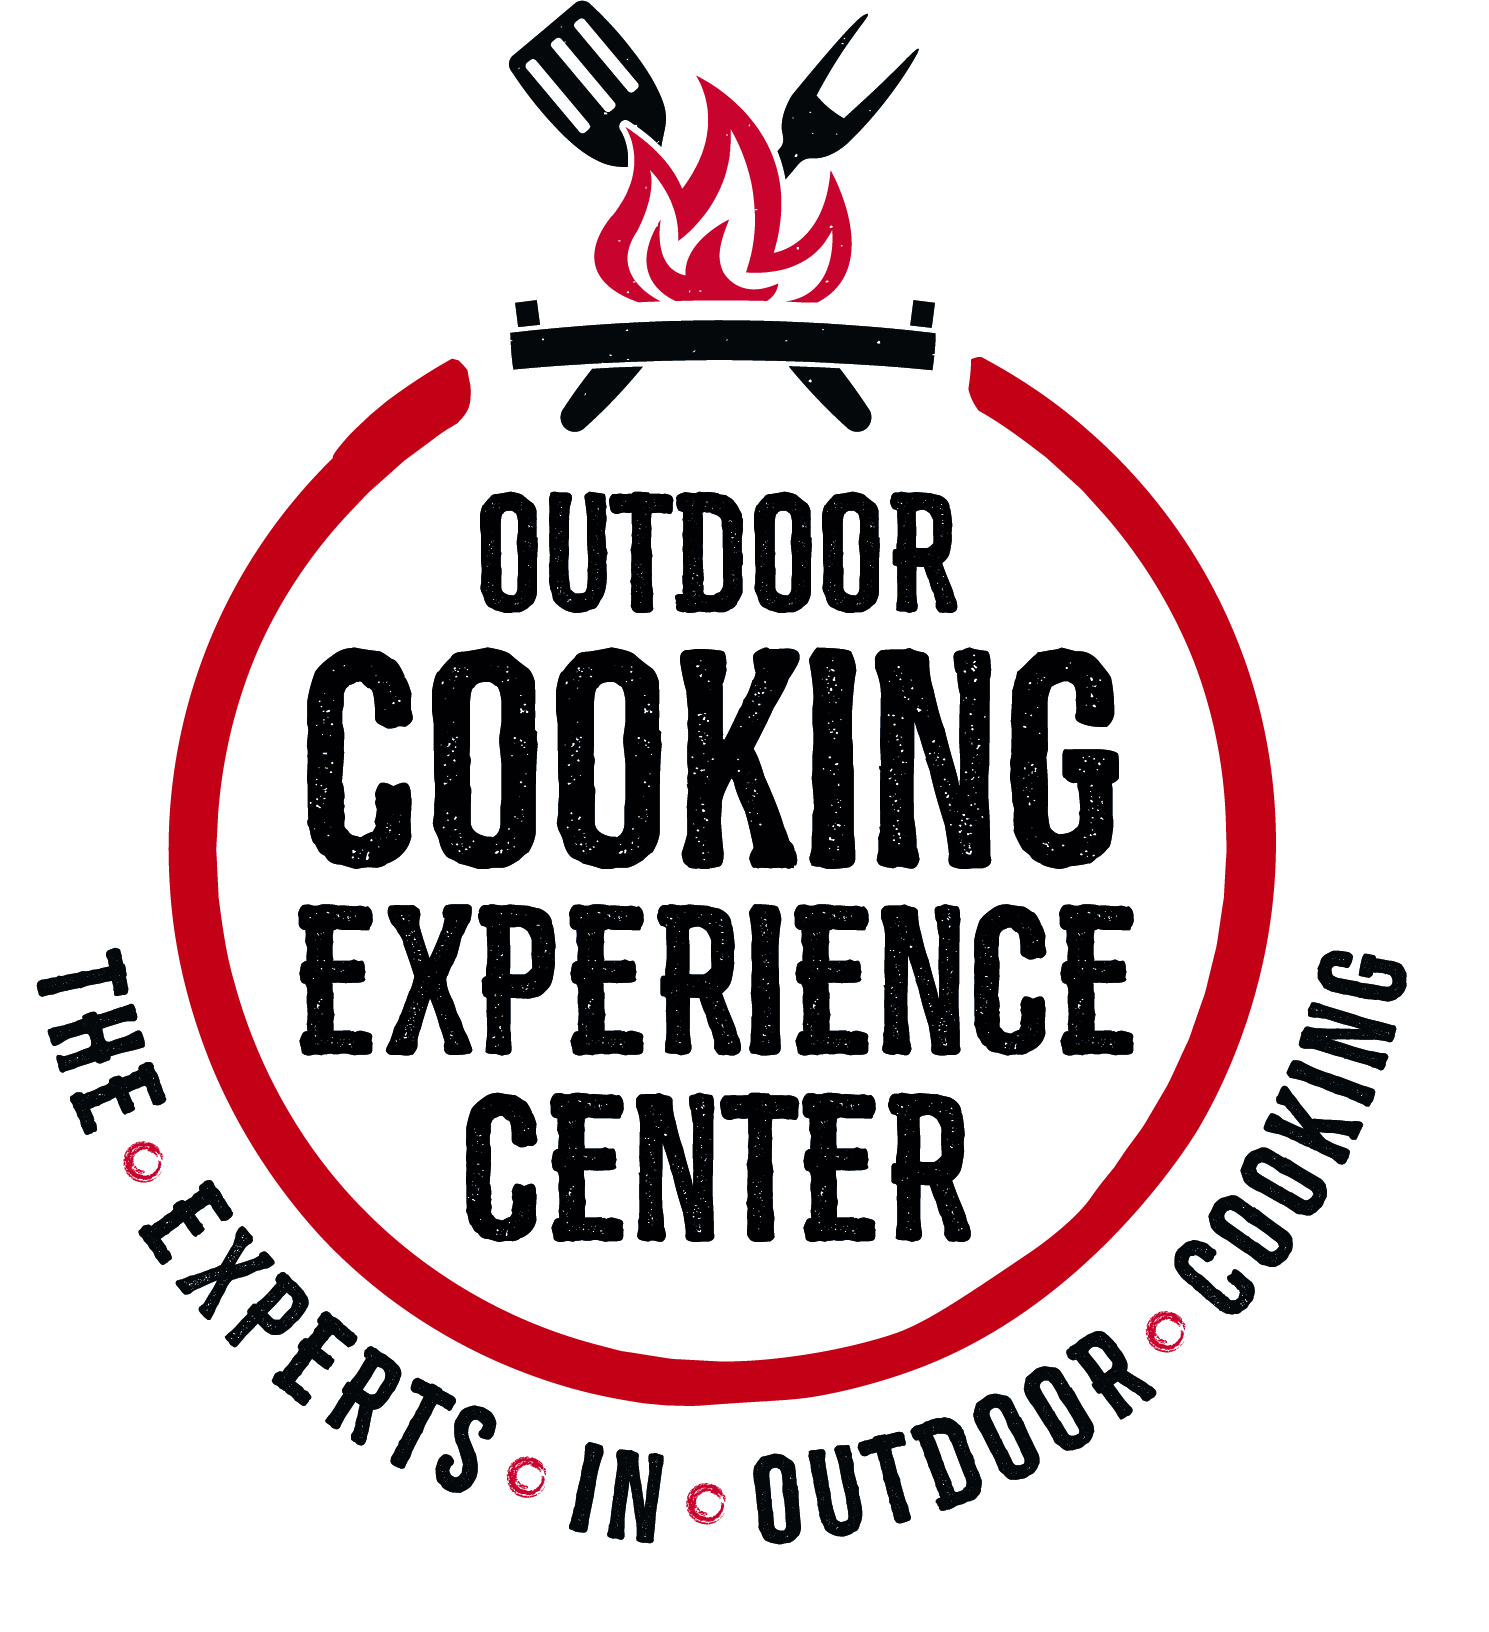 Outdoor Cooking Experience Center